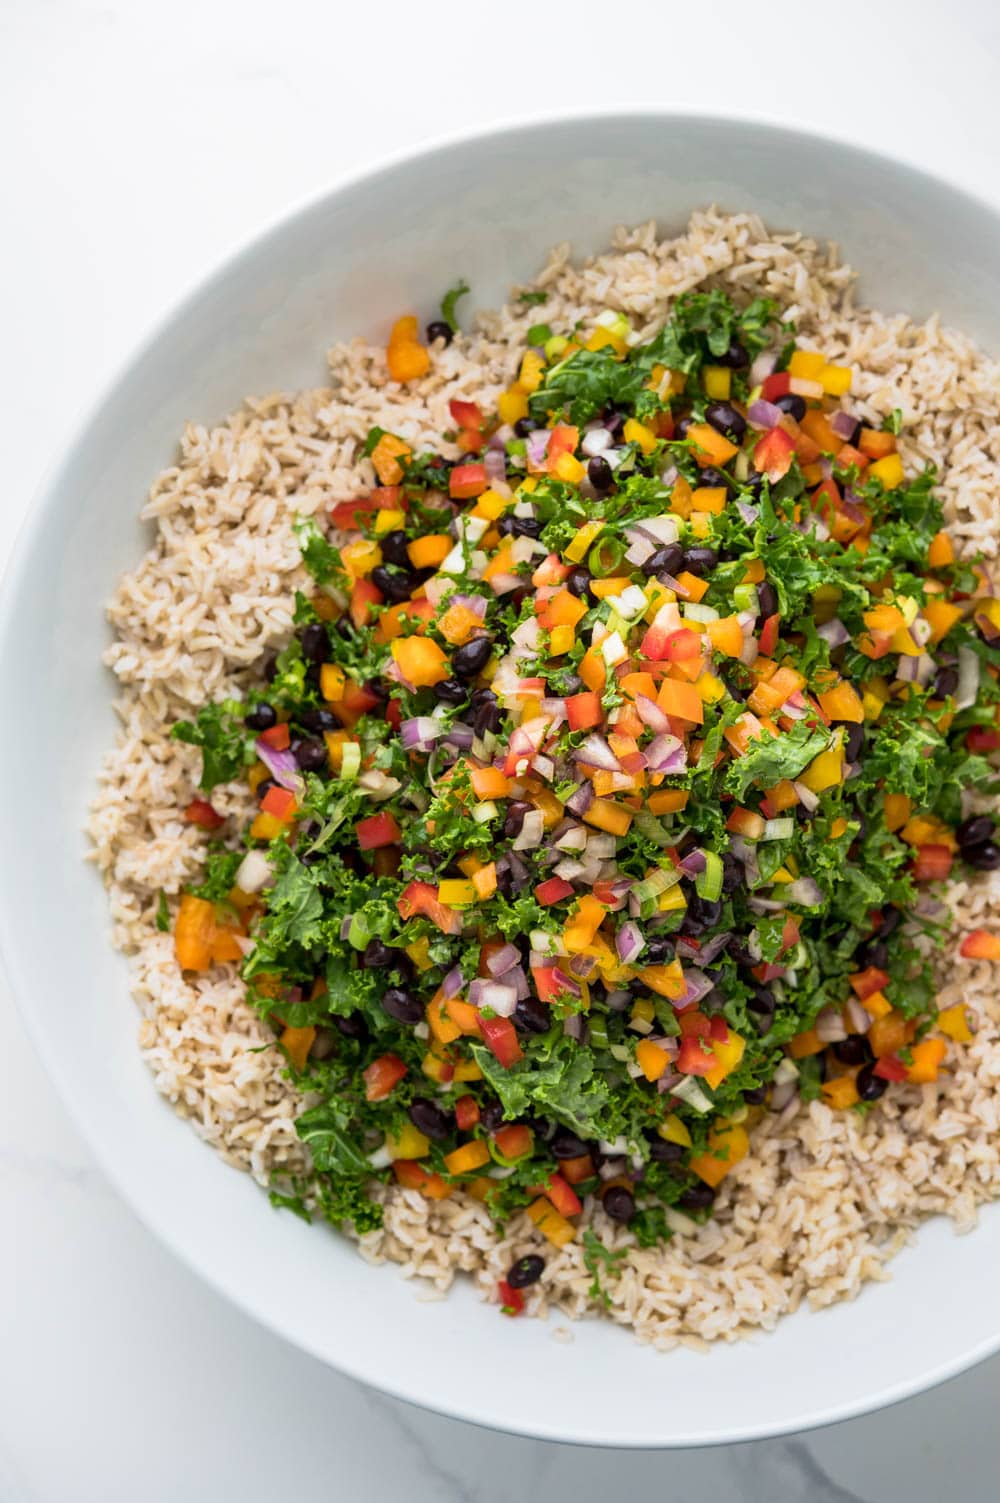 combining chopped veggies with cooked brown rice.